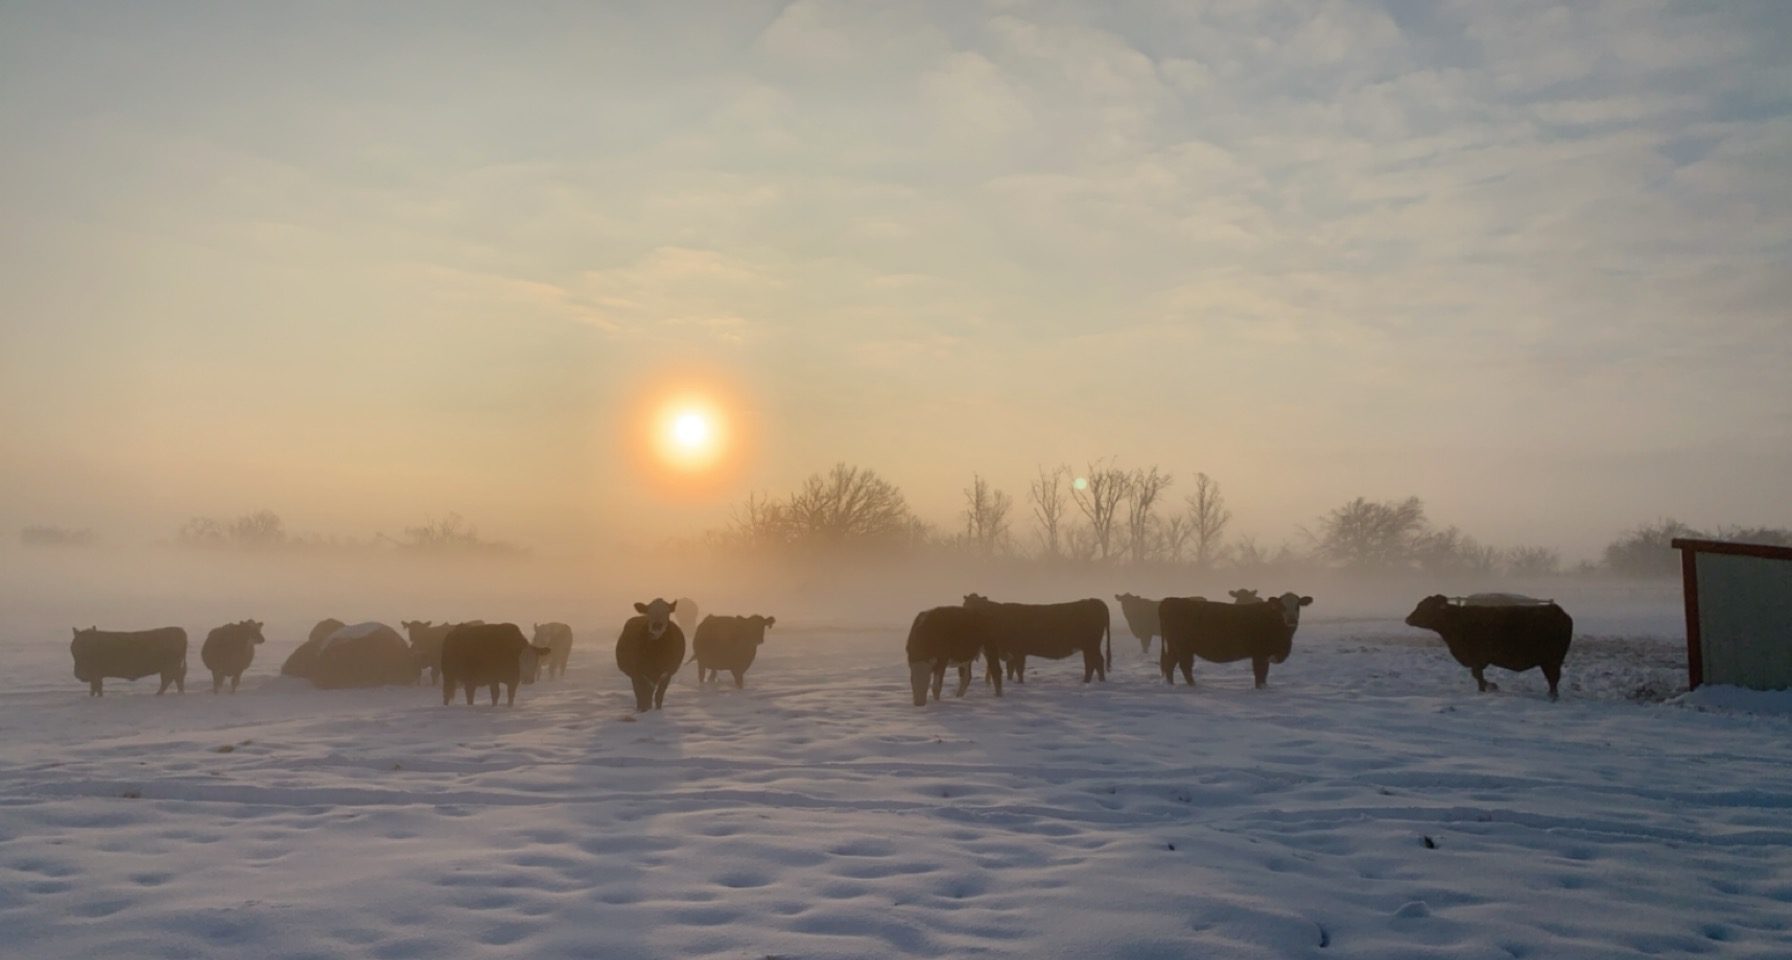 Cows in a snowy field at sunrise, surrounded by mist and bare trees